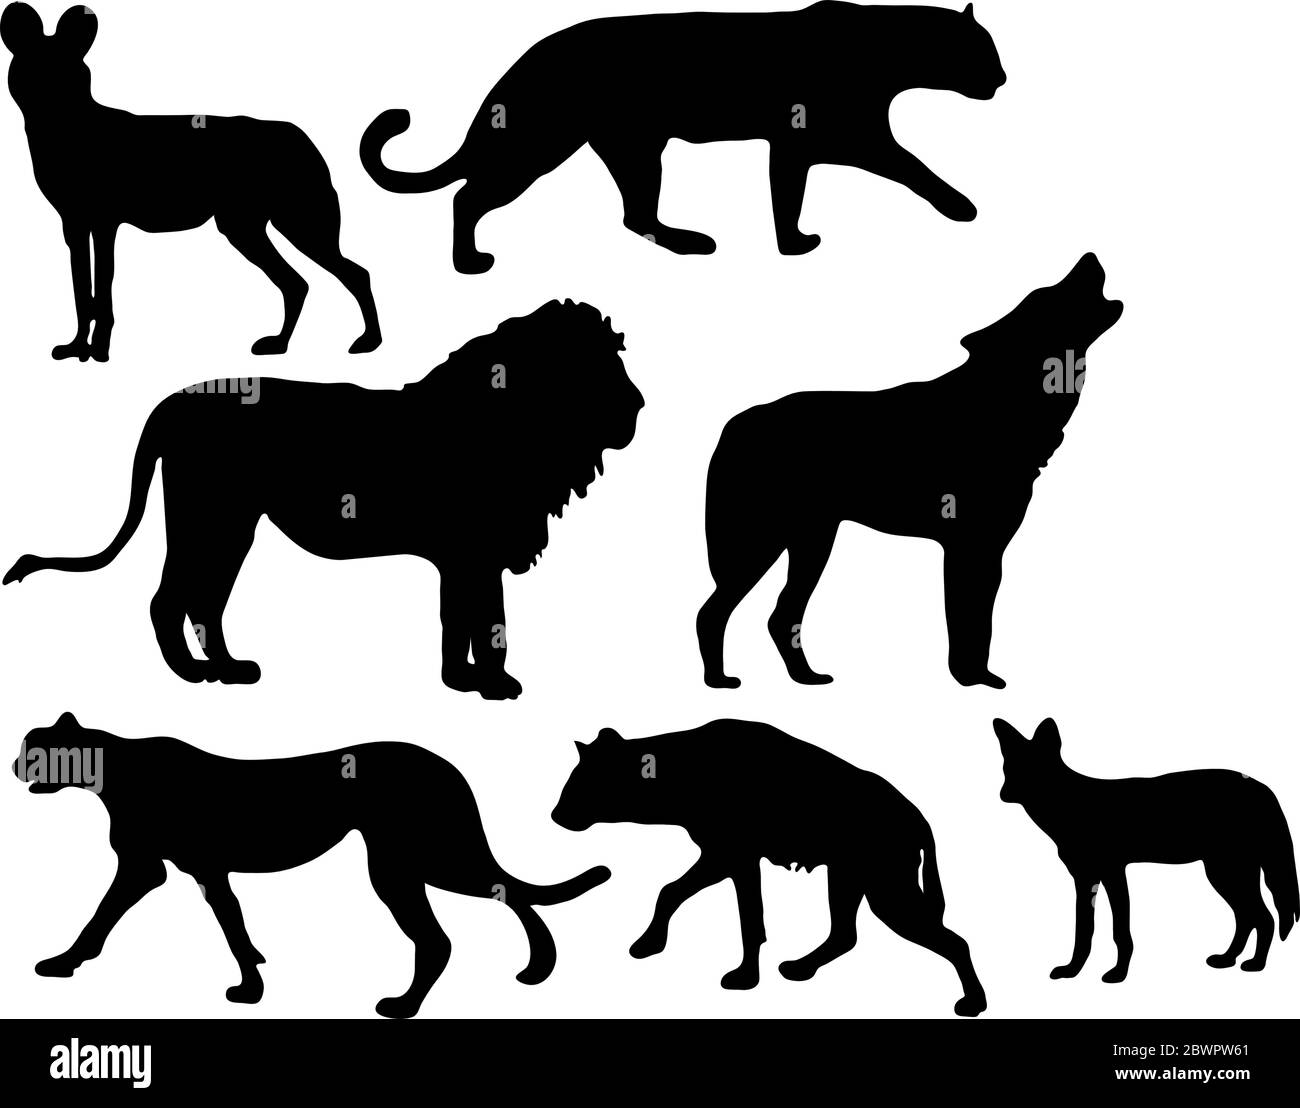 Selection of predator silhouettes (wild dog, cheetah, leopard, lion, wolf, hyena and jackal) Stock Vector